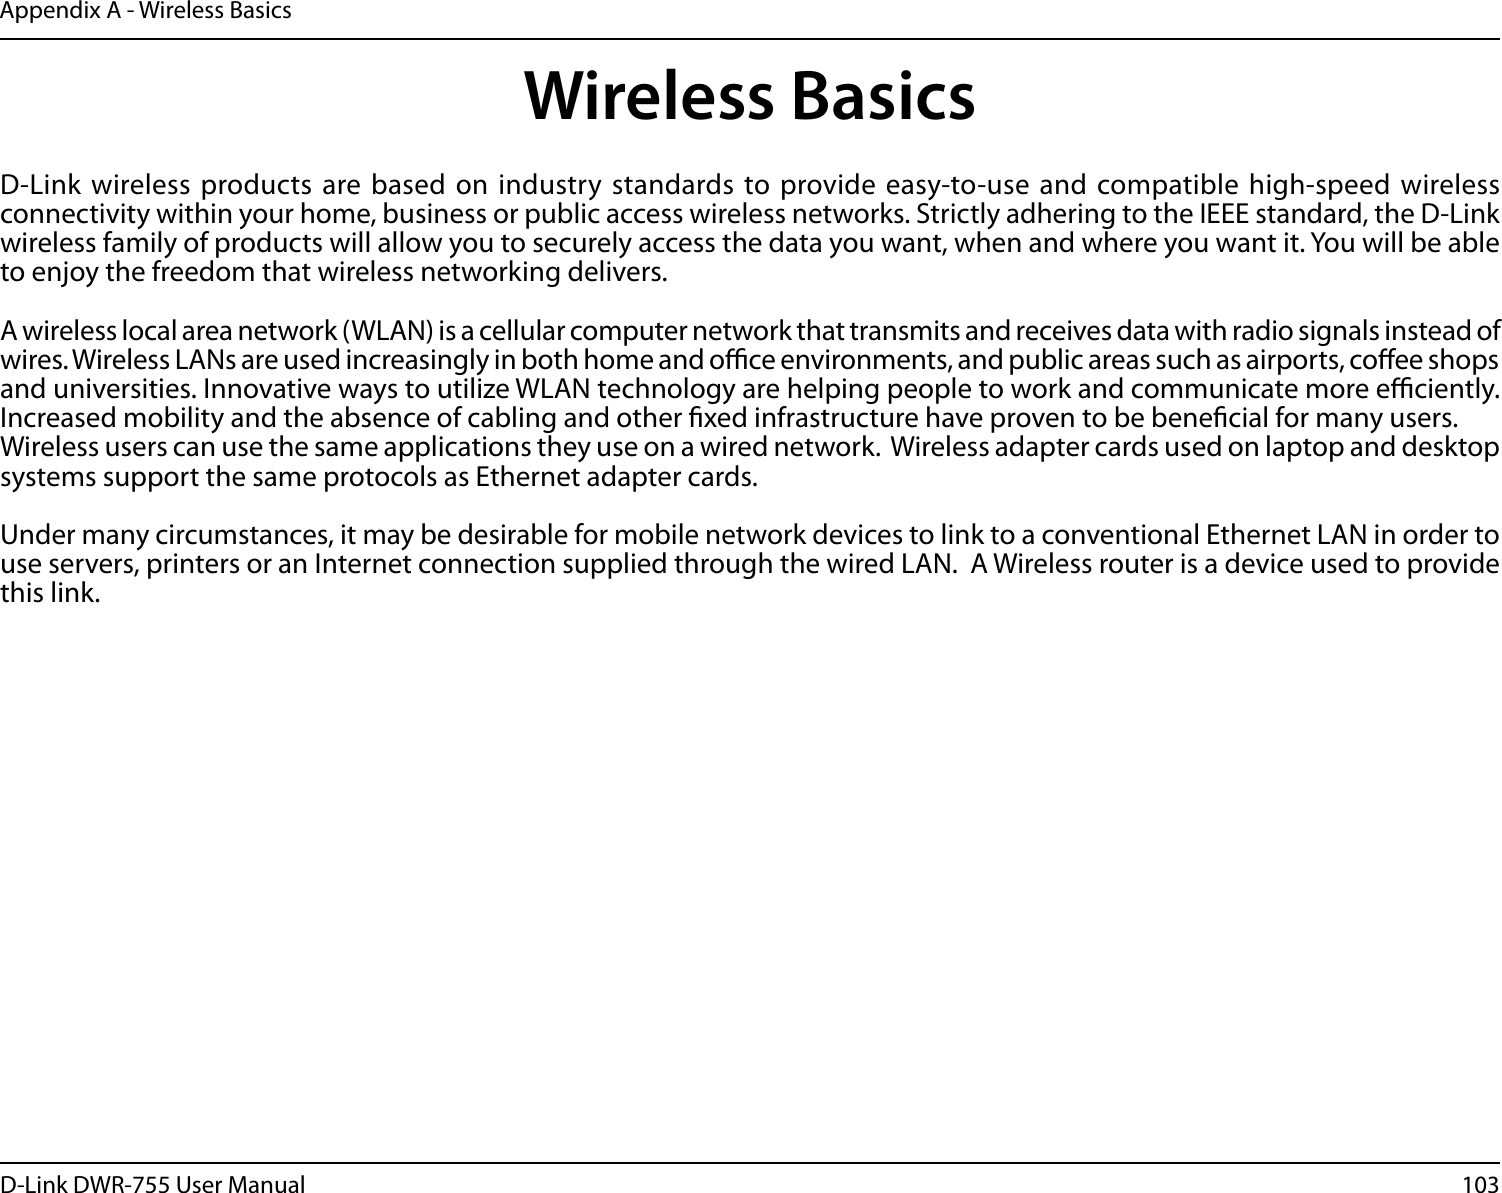 103D-Link DWR-755 User ManualAppendix A - Wireless BasicsD-Link wireless products are based on industry standards to provide easy-to-use and compatible high-speed wireless connectivity within your home, business or public access wireless networks. Strictly adhering to the IEEE standard, the D-Link wireless family of products will allow you to securely access the data you want, when and where you want it. You will be able to enjoy the freedom that wireless networking delivers.A wireless local area network (WLAN) is a cellular computer network that transmits and receives data with radio signals instead of wires. Wireless LANs are used increasingly in both home and oce environments, and public areas such as airports, coee shops and universities. Innovative ways to utilize WLAN technology are helping people to work and communicate more eciently. Increased mobility and the absence of cabling and other xed infrastructure have proven to be benecial for many users. Wireless users can use the same applications they use on a wired network.  Wireless adapter cards used on laptop and desktop systems support the same protocols as Ethernet adapter cards. Under many circumstances, it may be desirable for mobile network devices to link to a conventional Ethernet LAN in order to use servers, printers or an Internet connection supplied through the wired LAN.  A Wireless router is a device used to provide this link.Wireless Basics